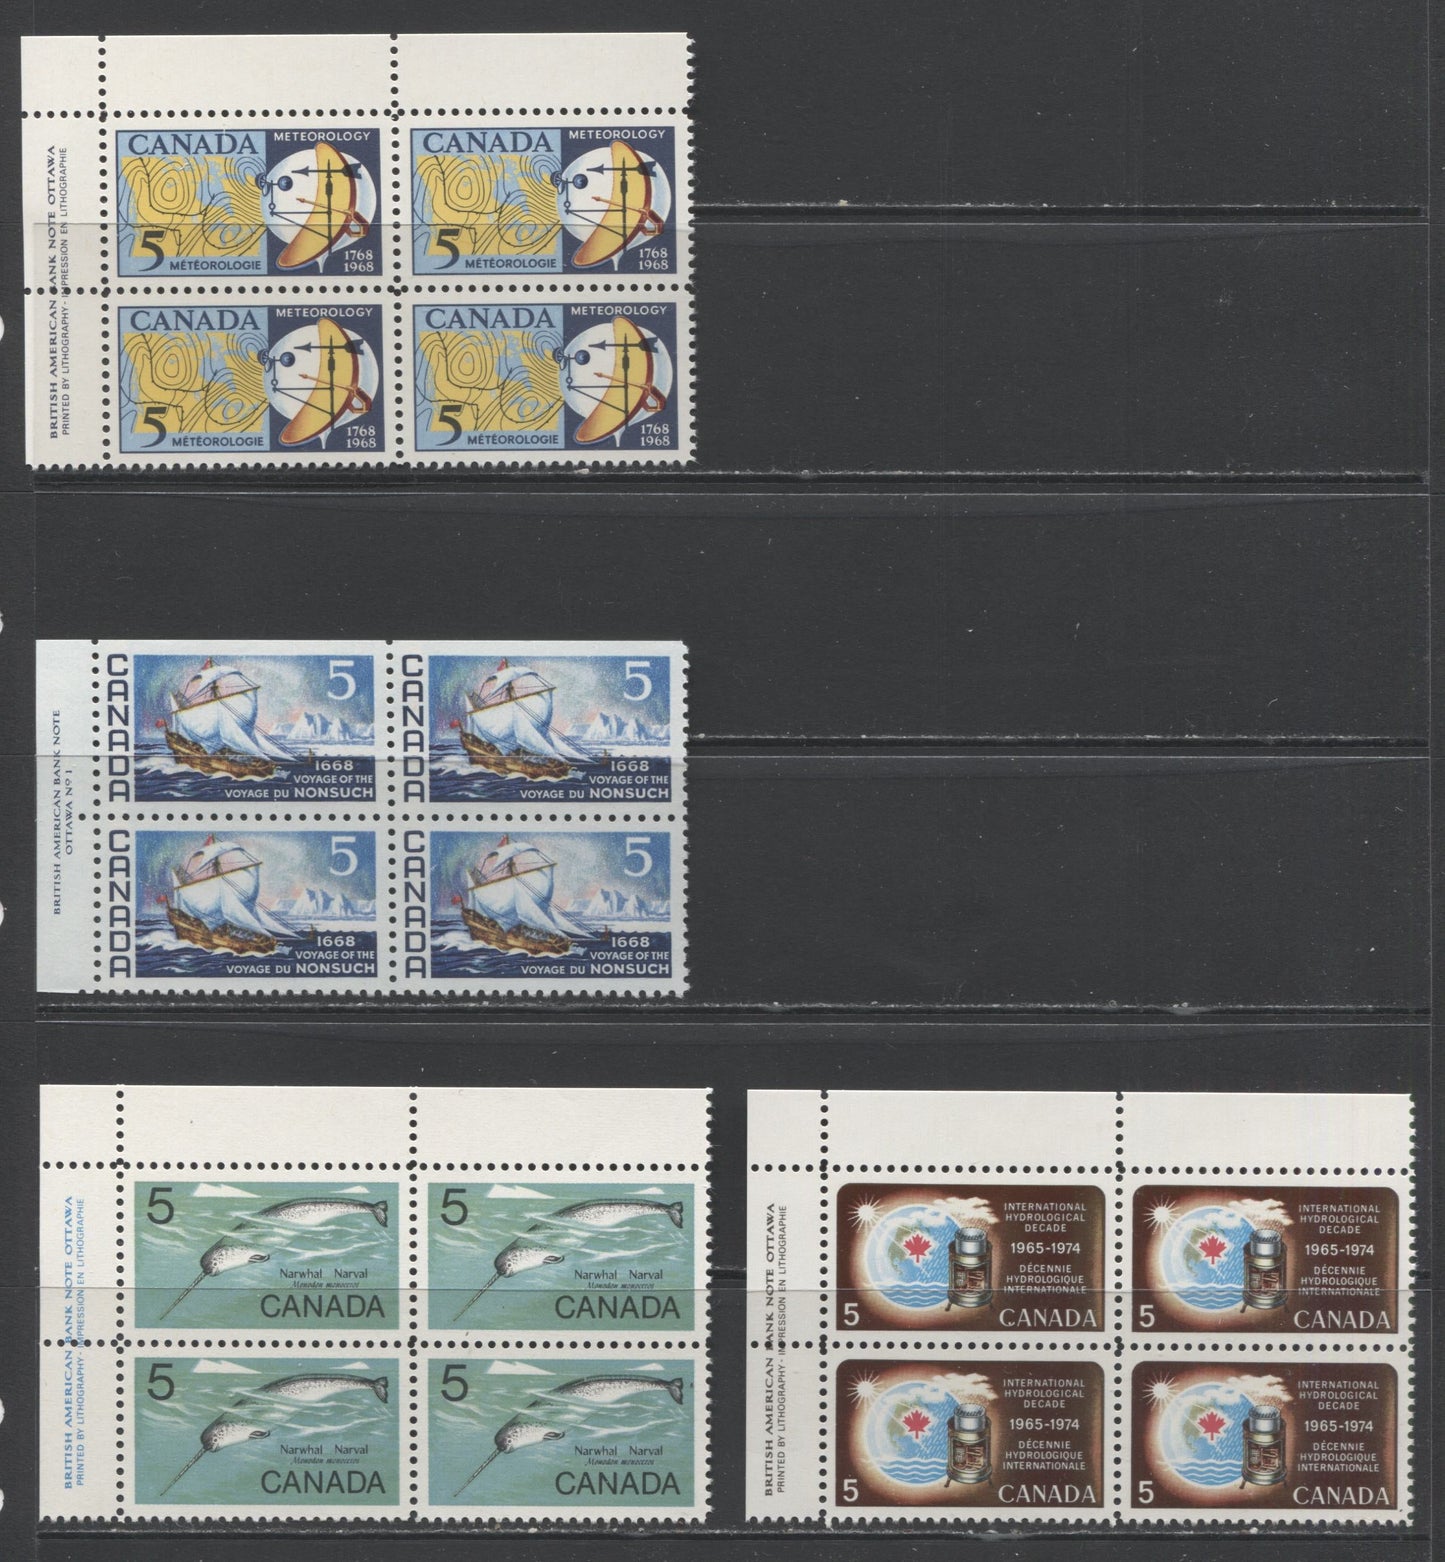 Lot 86 Canada #479-485, 487-491 5c & 6c Dark And Light Blue, Yellow & Red - Yellow Olive & Dark Brown Weather Map & Instruments - Vincent Massey, 1968-1969 Commemoratives, 12 VFNH UL Plate 1 Blocks Of 4 On Dull, Medium, HF and HB Papers